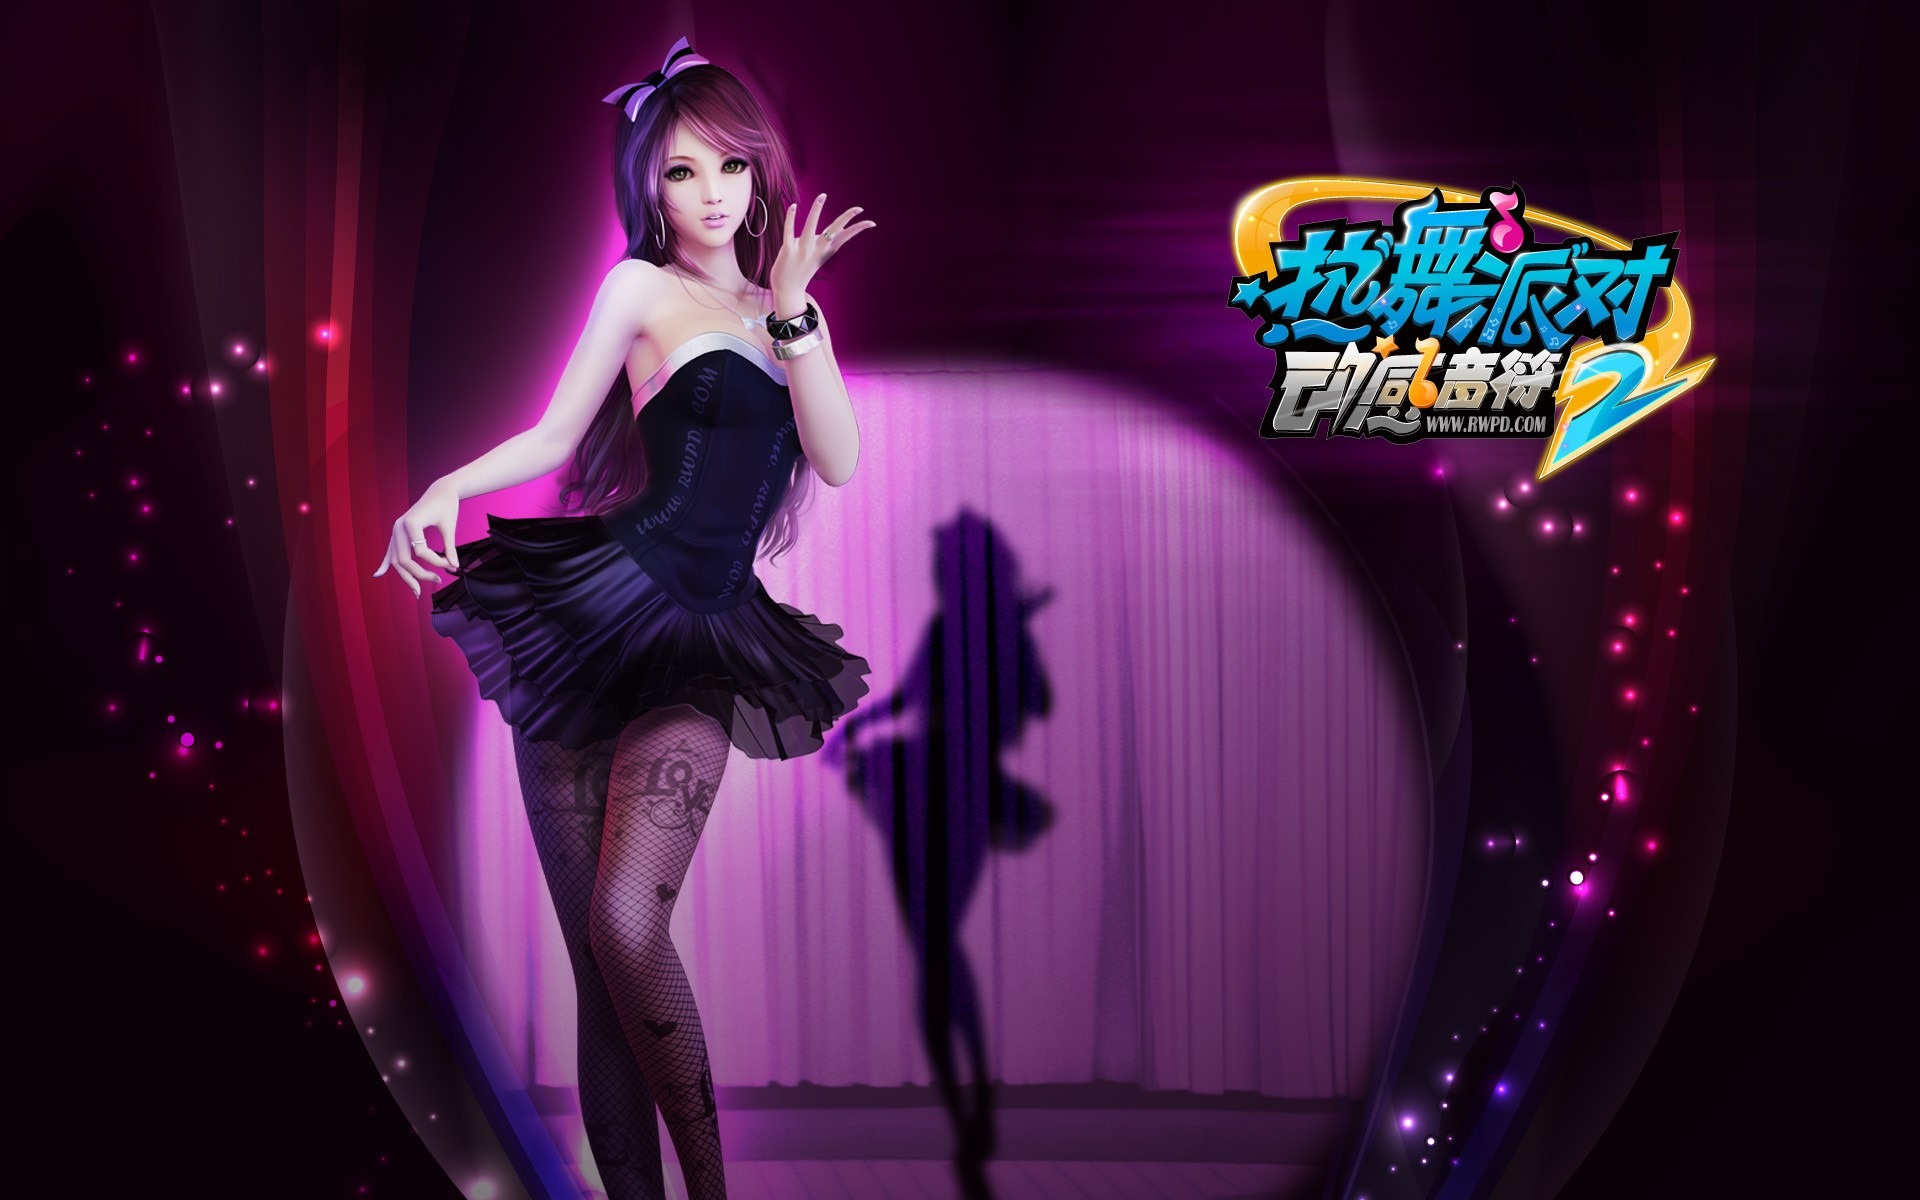 Online game Hot Dance Party II official wallpapers #29 - 1920x1200